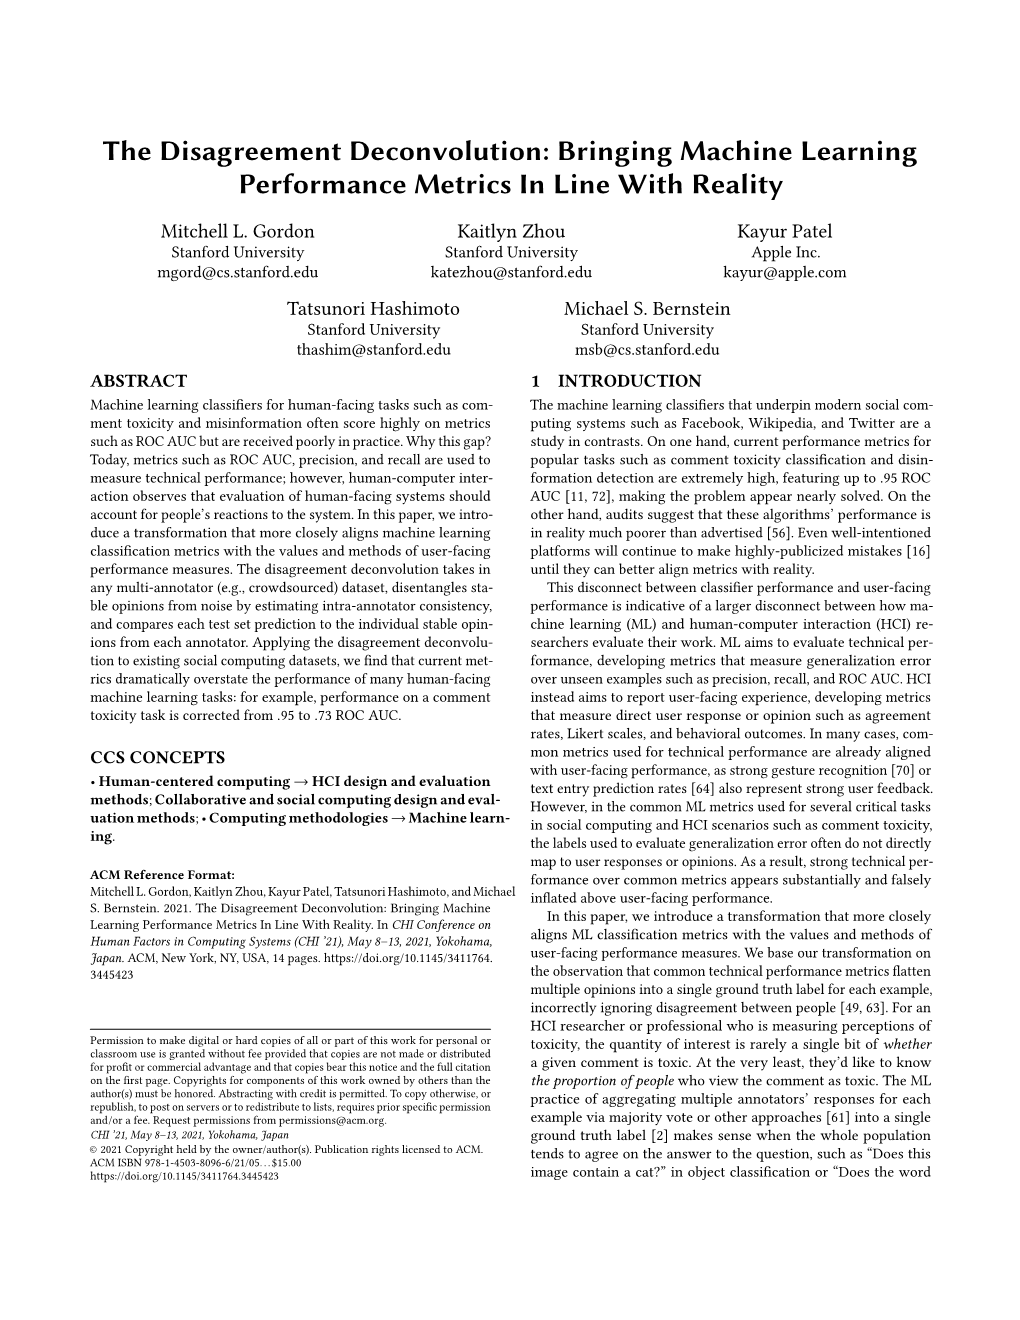 The Disagreement Deconvolution: Bringing Machine Learning Performance Metrics in Line with Reality